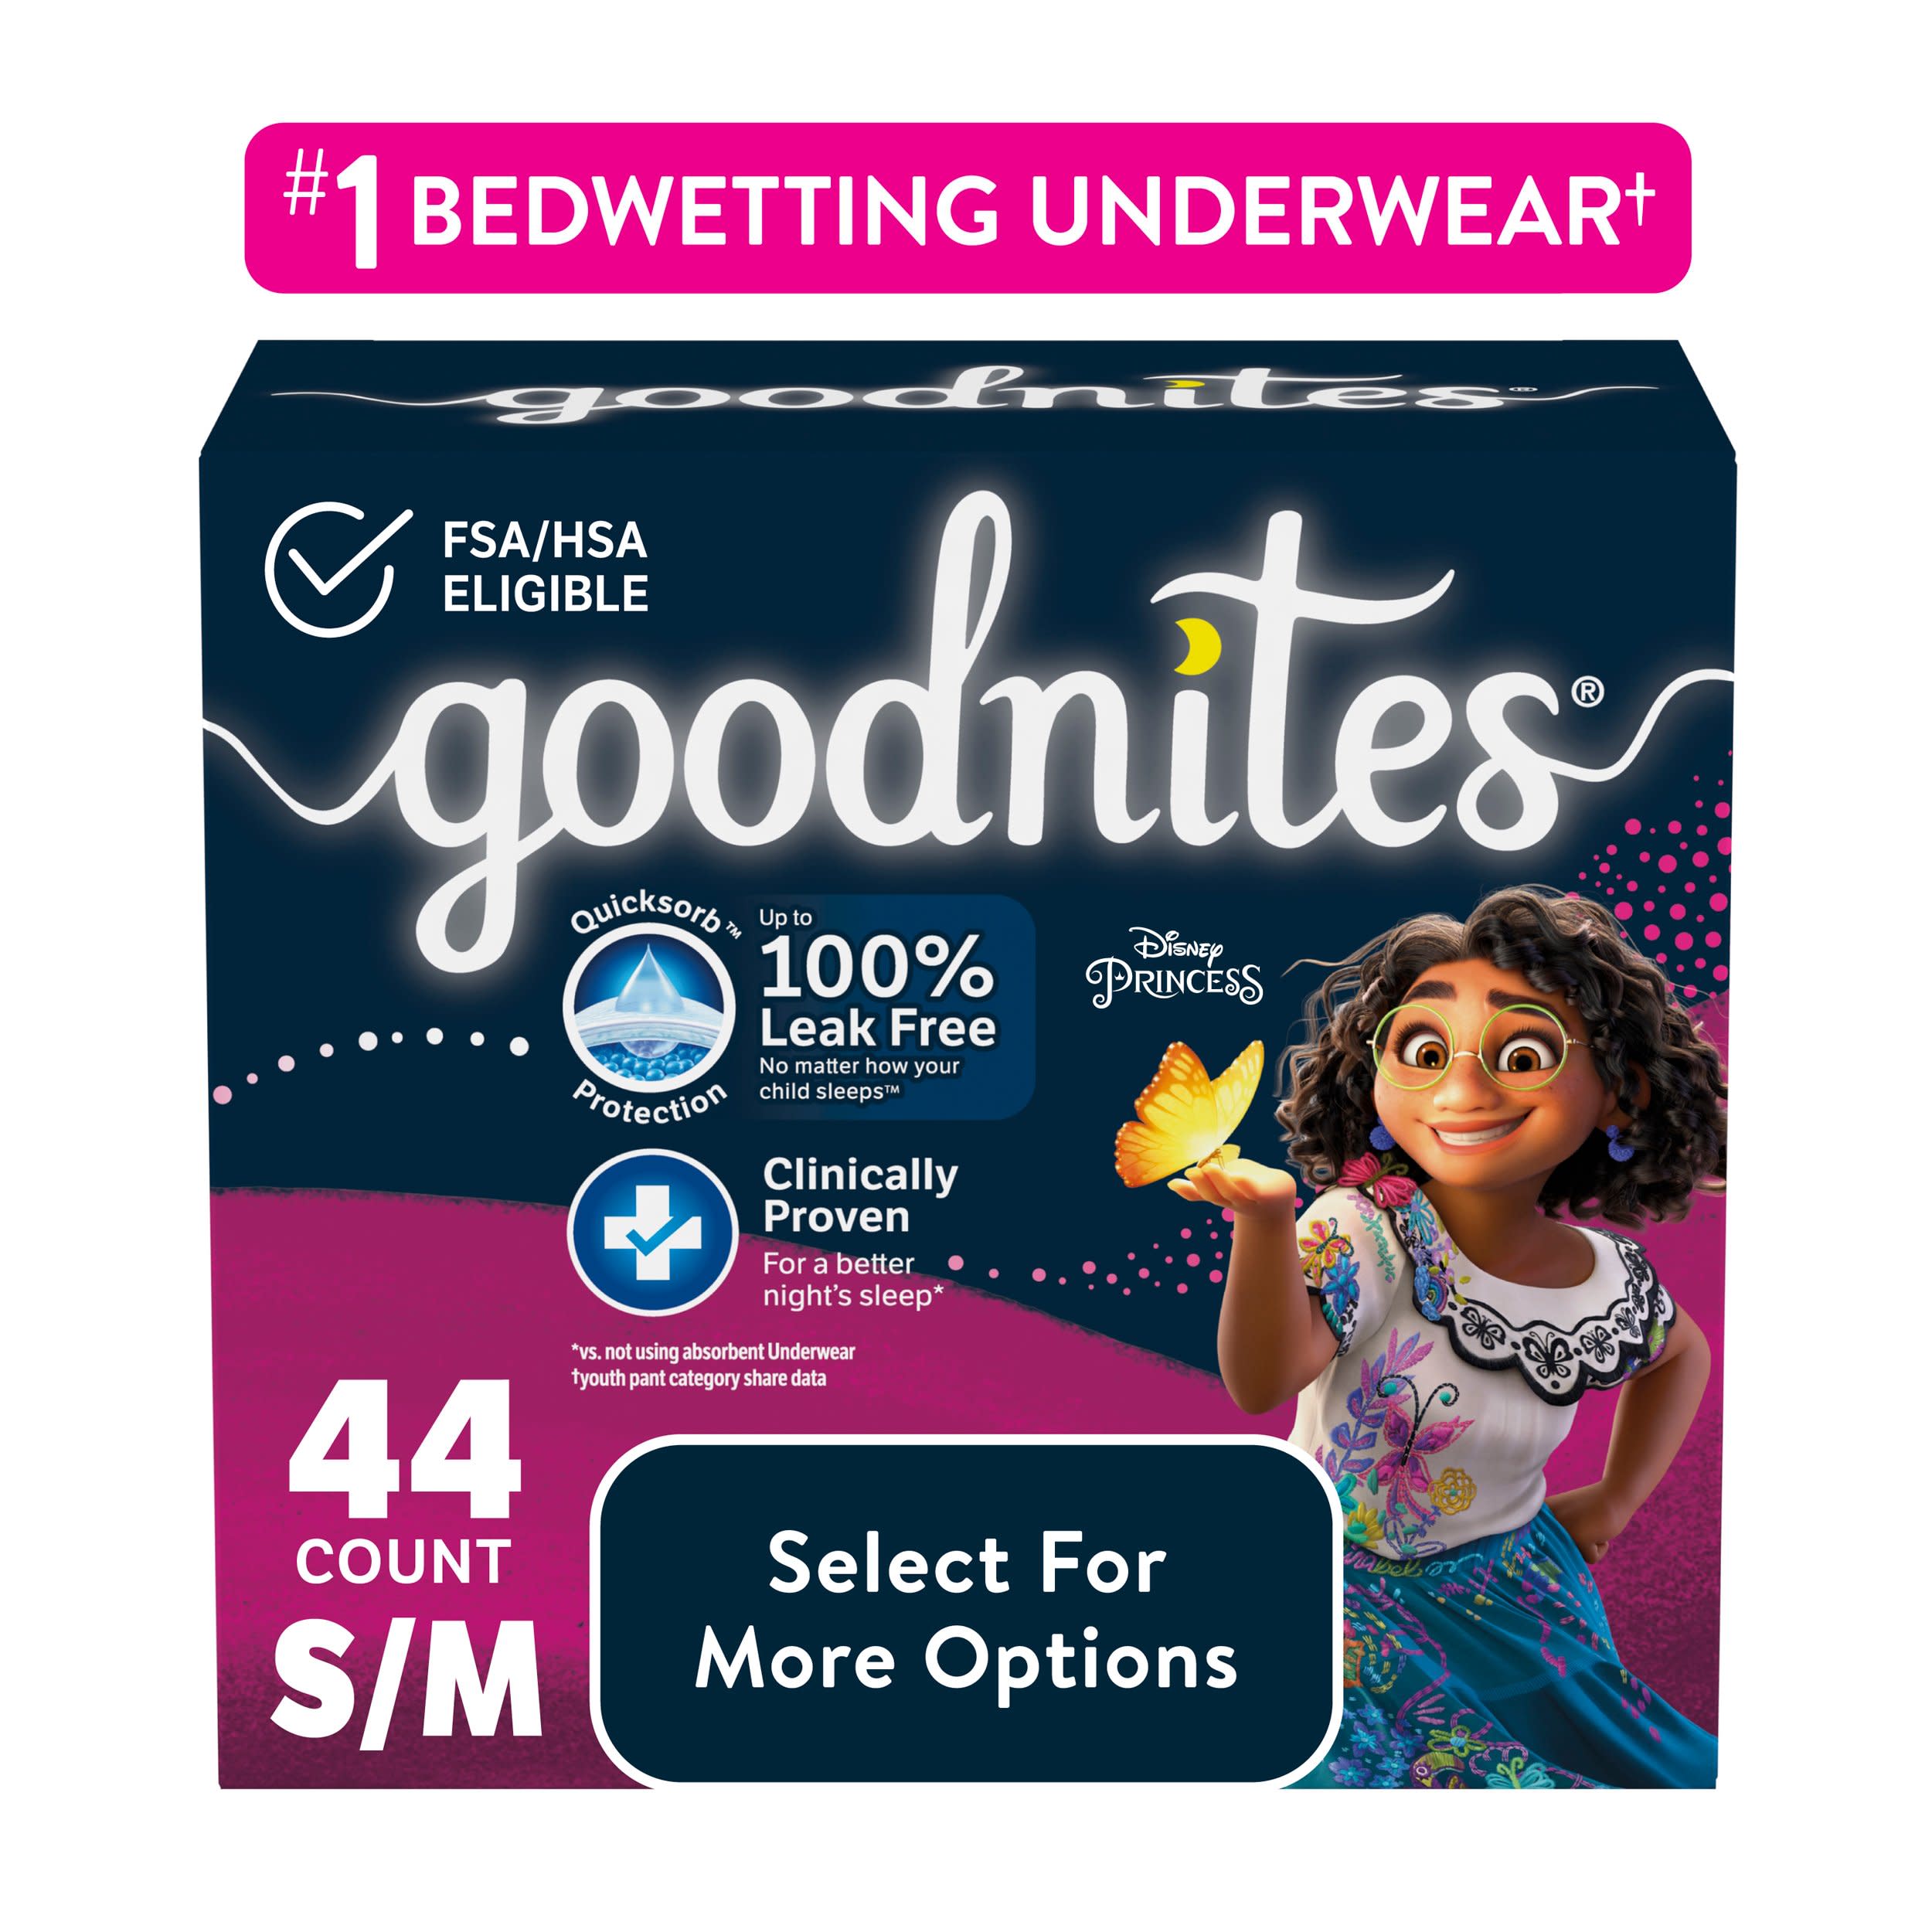 Goodnites Nighttime Bedwetting Underwear for Girls, S/M, 44 Ct (Select for More Options) - image 1 of 10